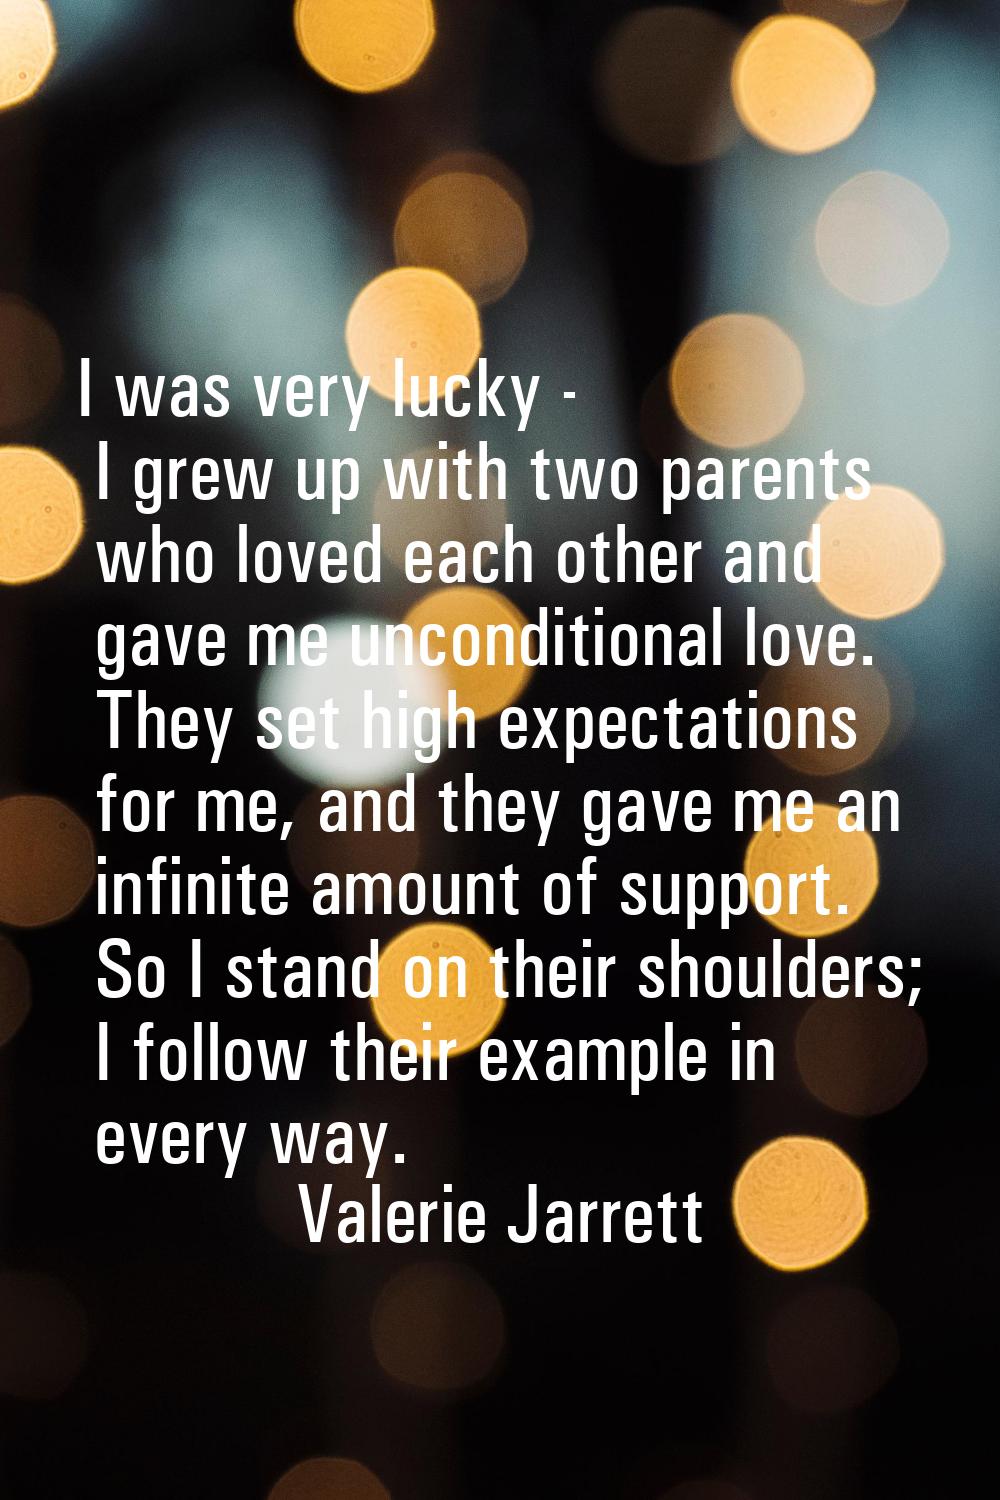 I was very lucky - I grew up with two parents who loved each other and gave me unconditional love. 